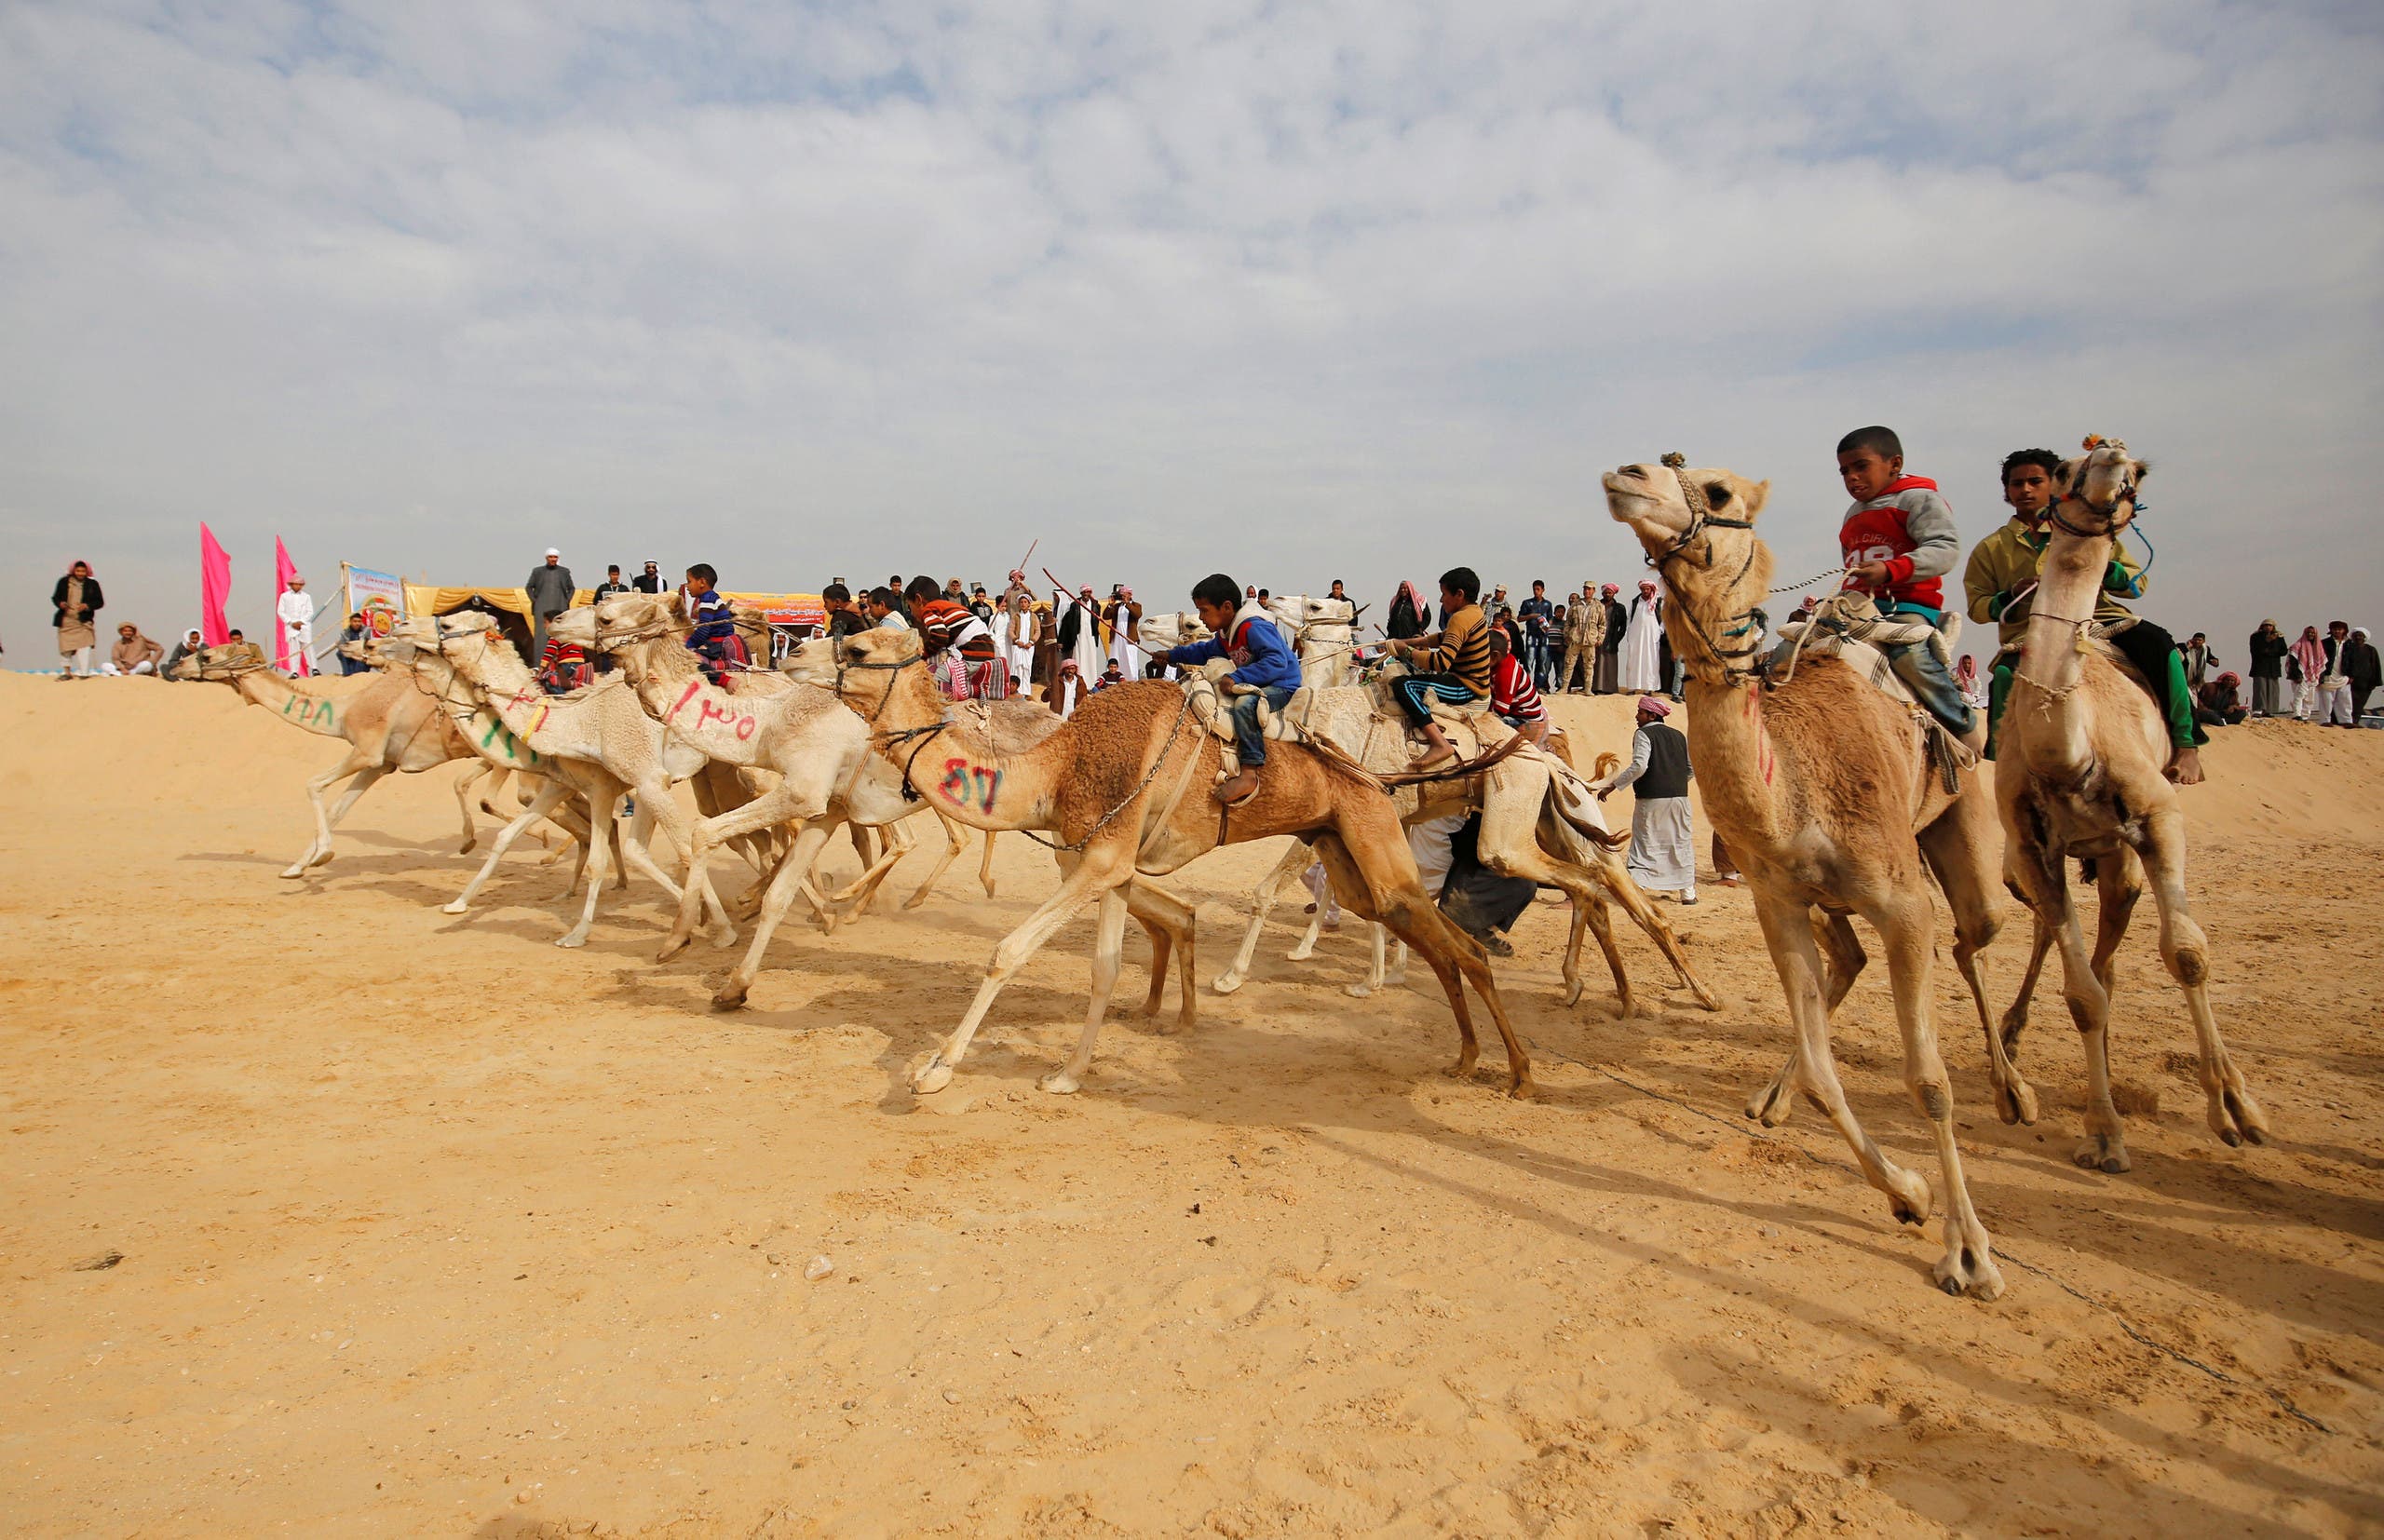 Jockeys, most of whom are children, compete on their mounts at the starting line during the opening of the International Camel Racing festival at the Sarabium desert in Ismailia, Egypt, March 21, 2017. (Reuters)